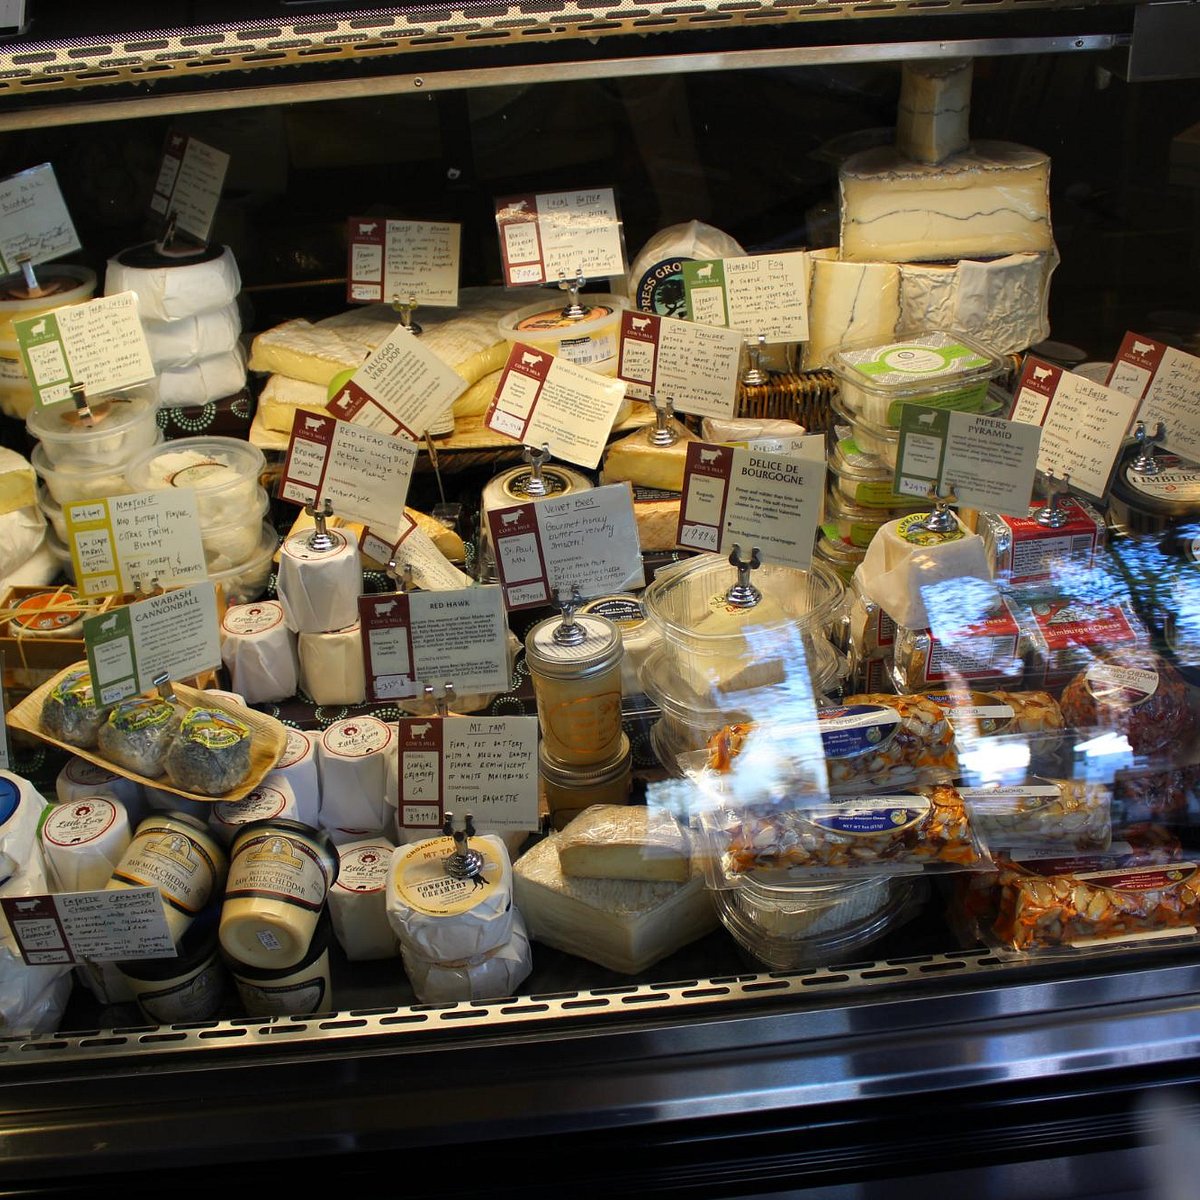 Cheese Producers - Fromagination